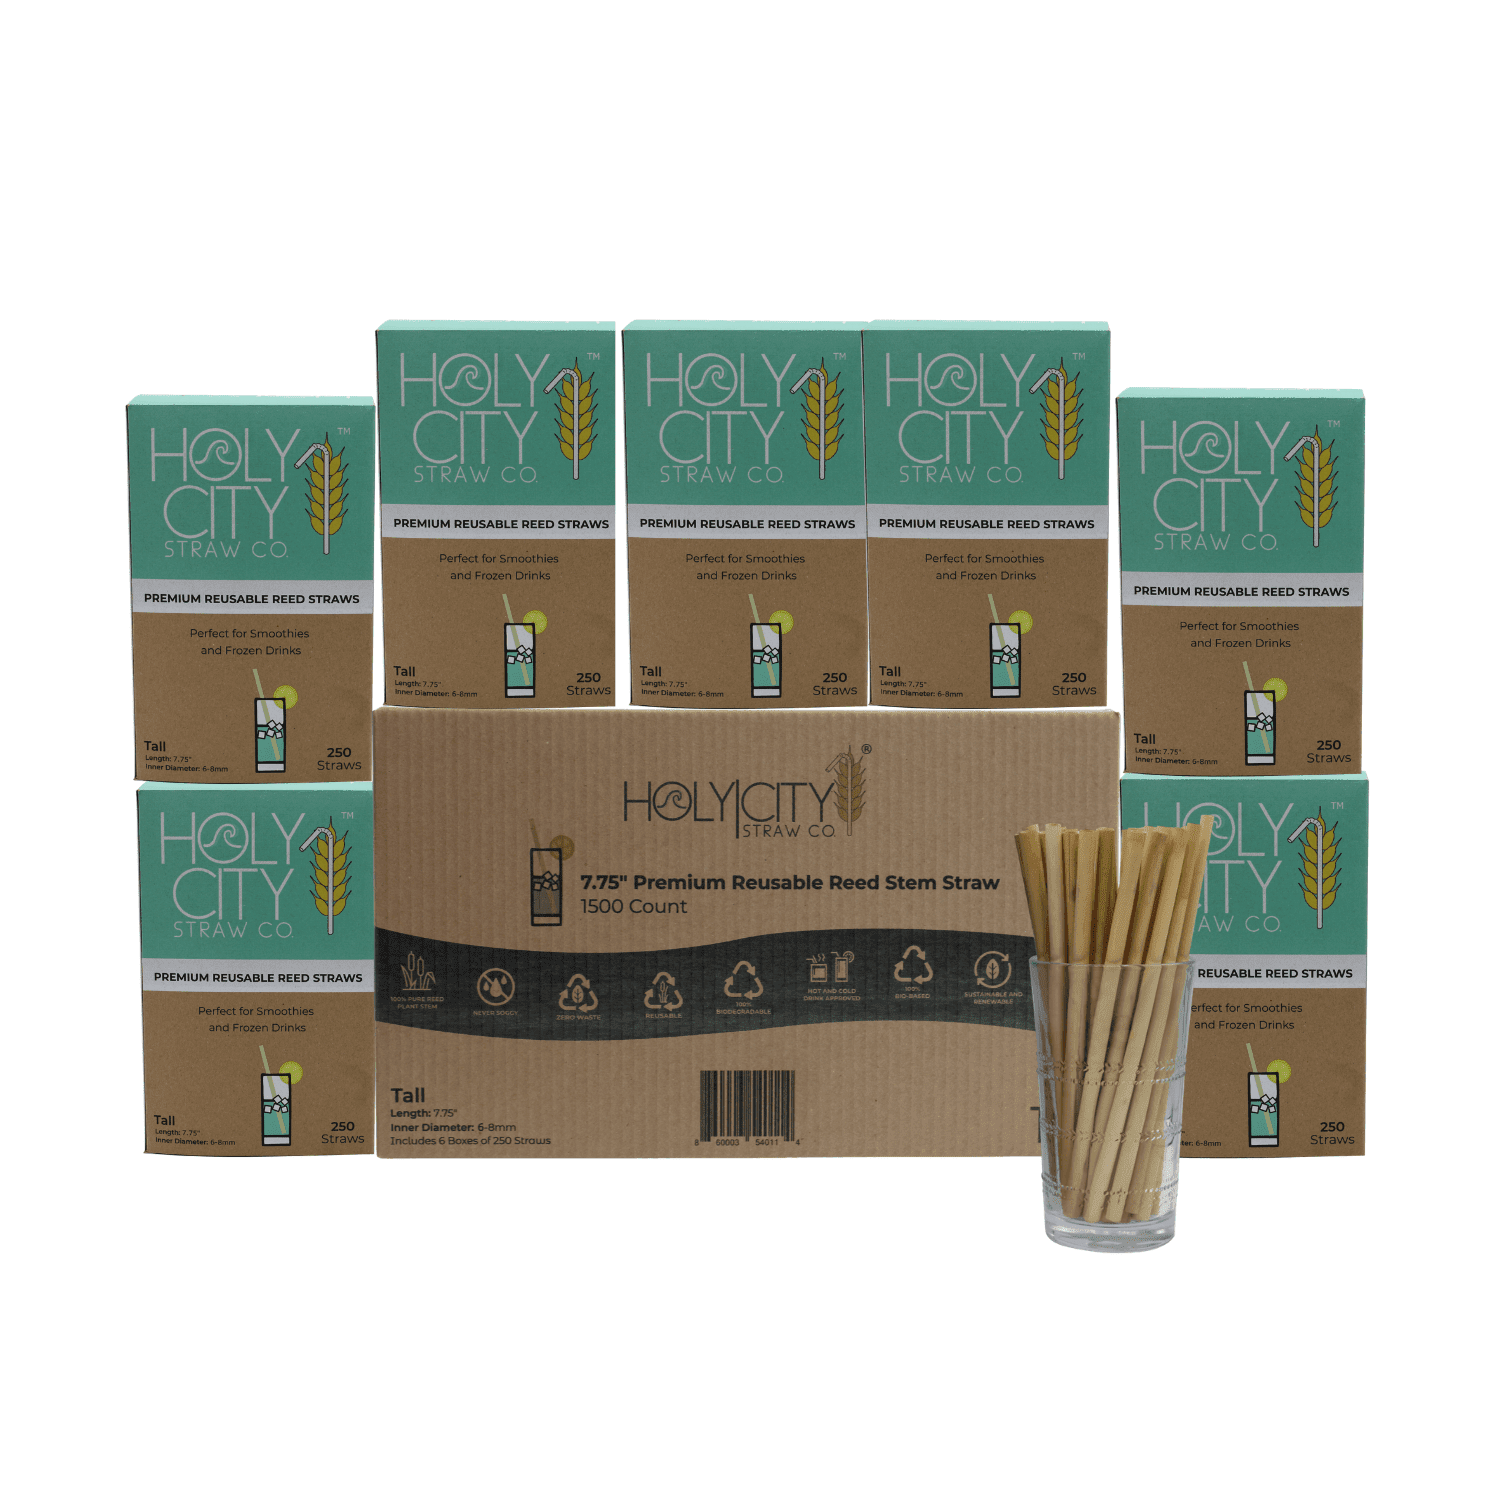 1500 count case containing 6 boxes of 250 ct boxes of Holy City tall reusable reed Straws